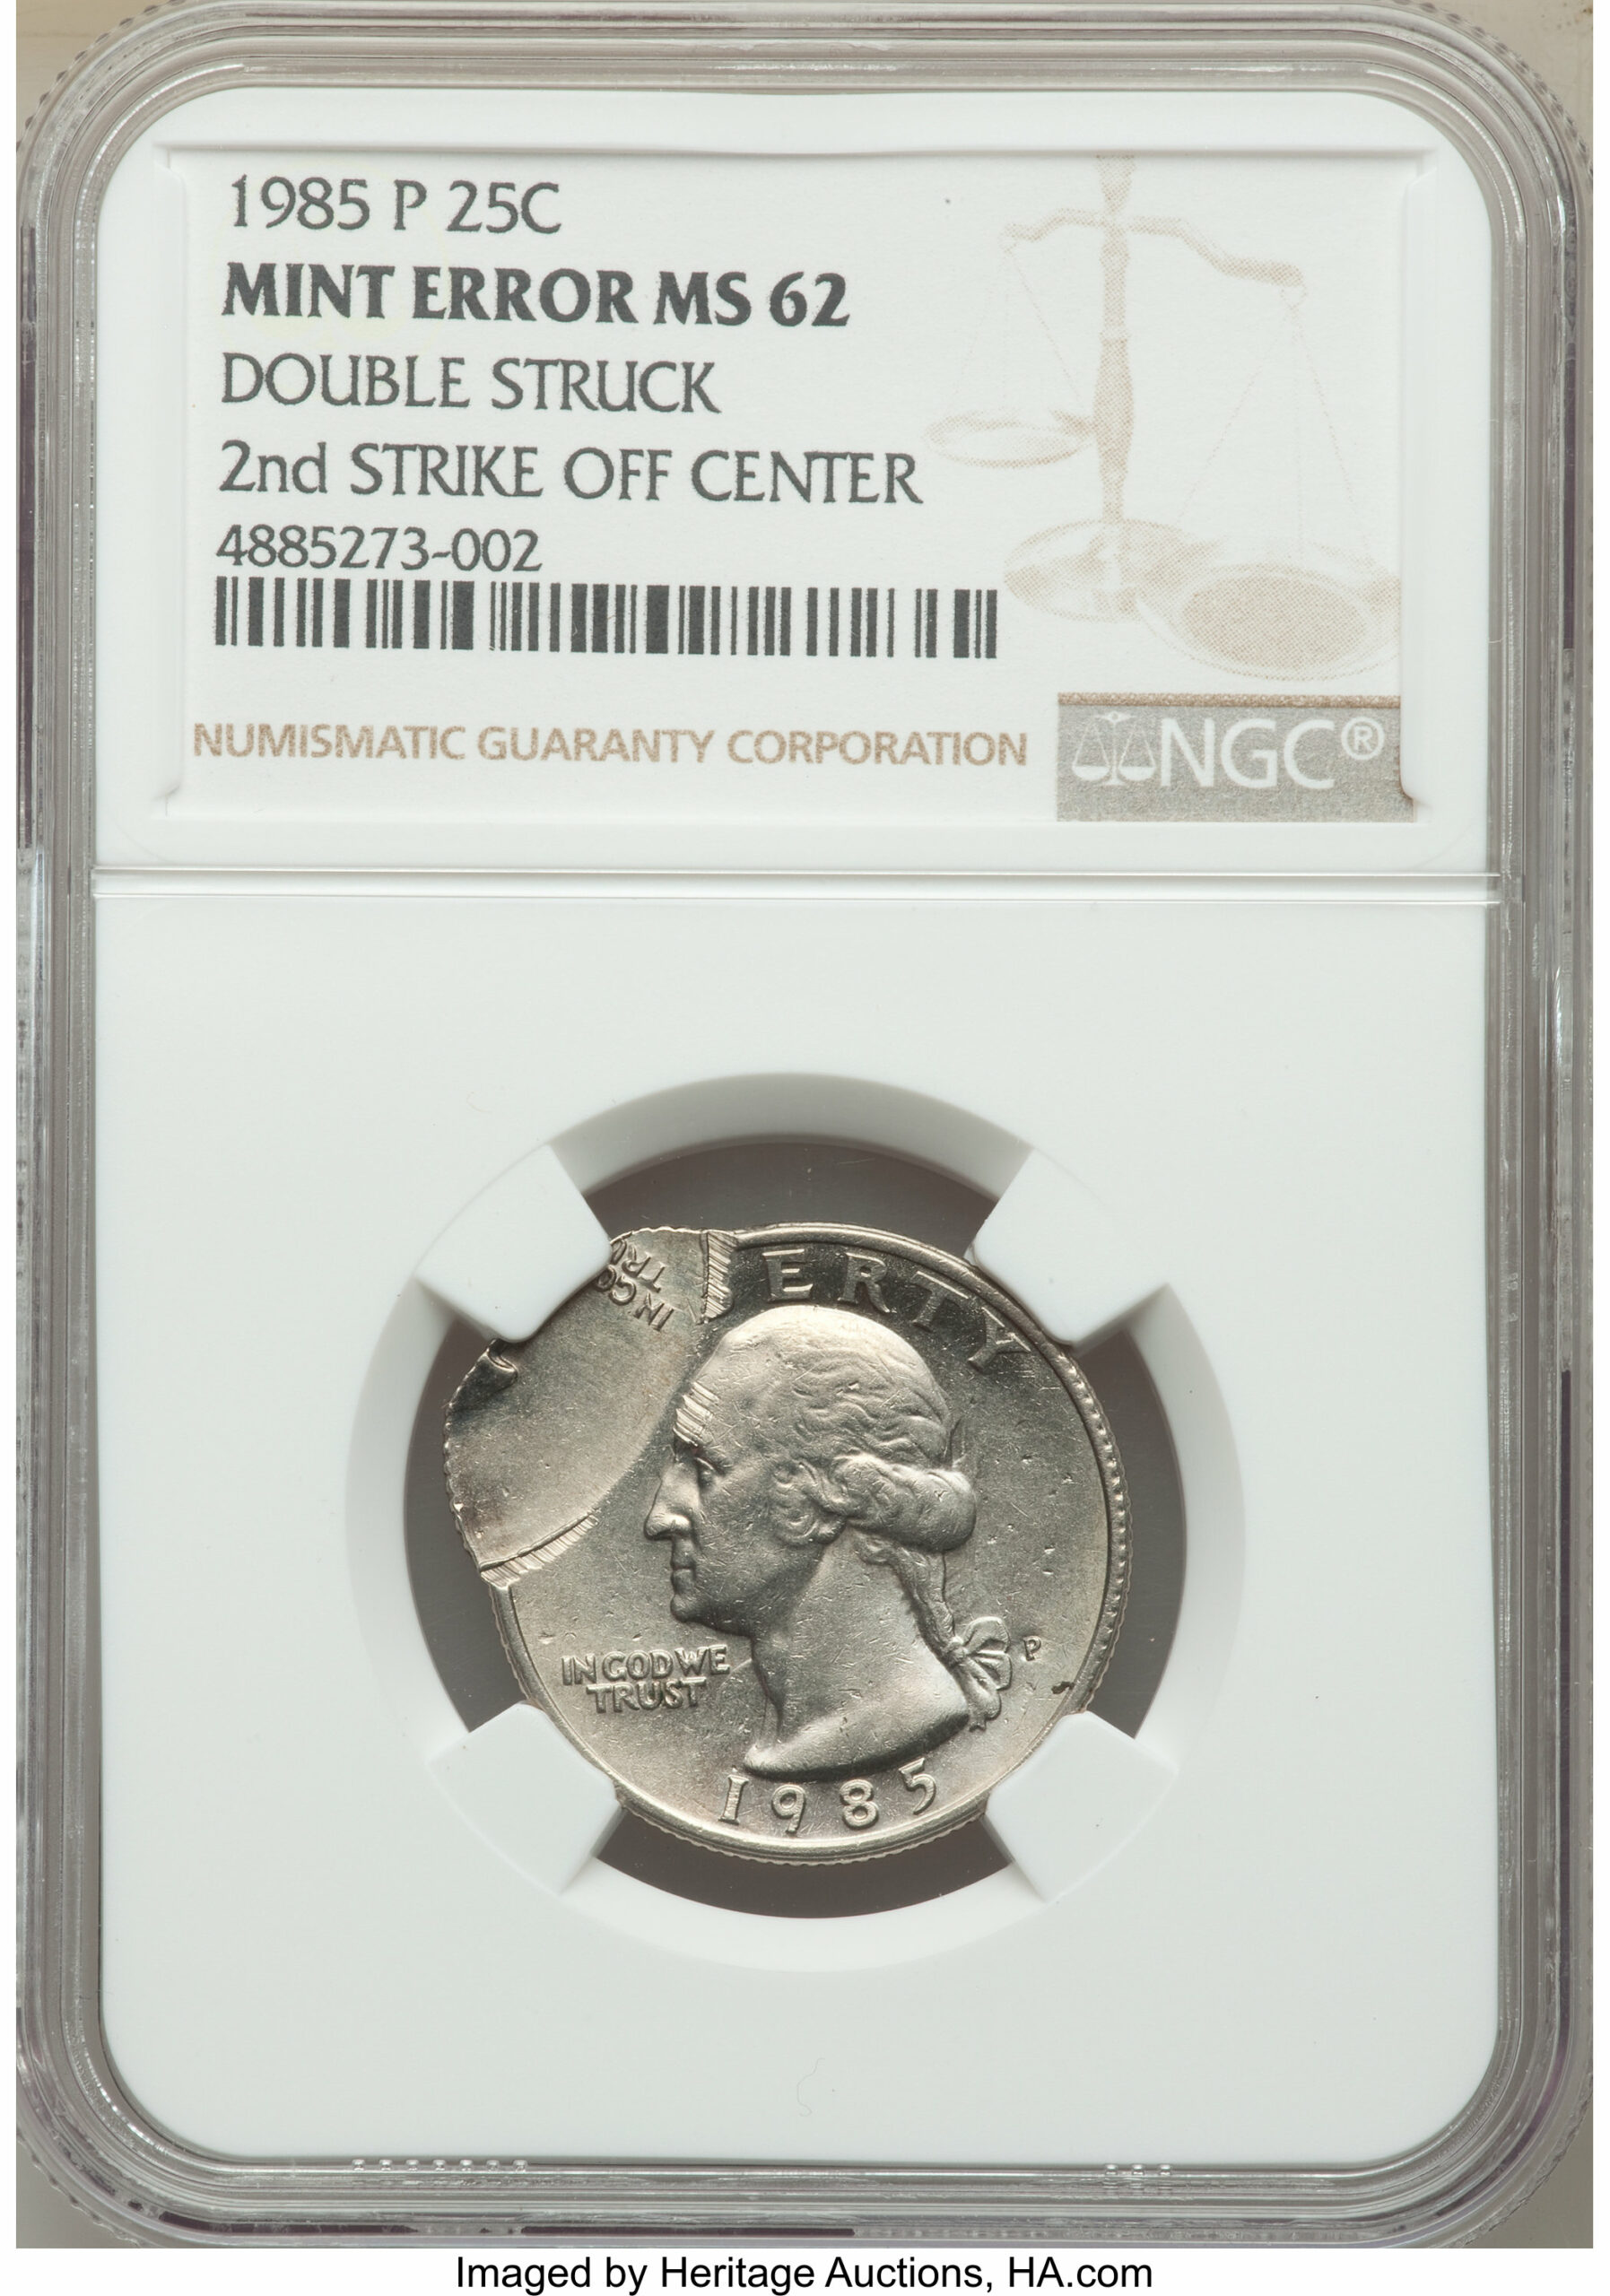 1985 P Quarter Doublestruck with Second Strike Off Center